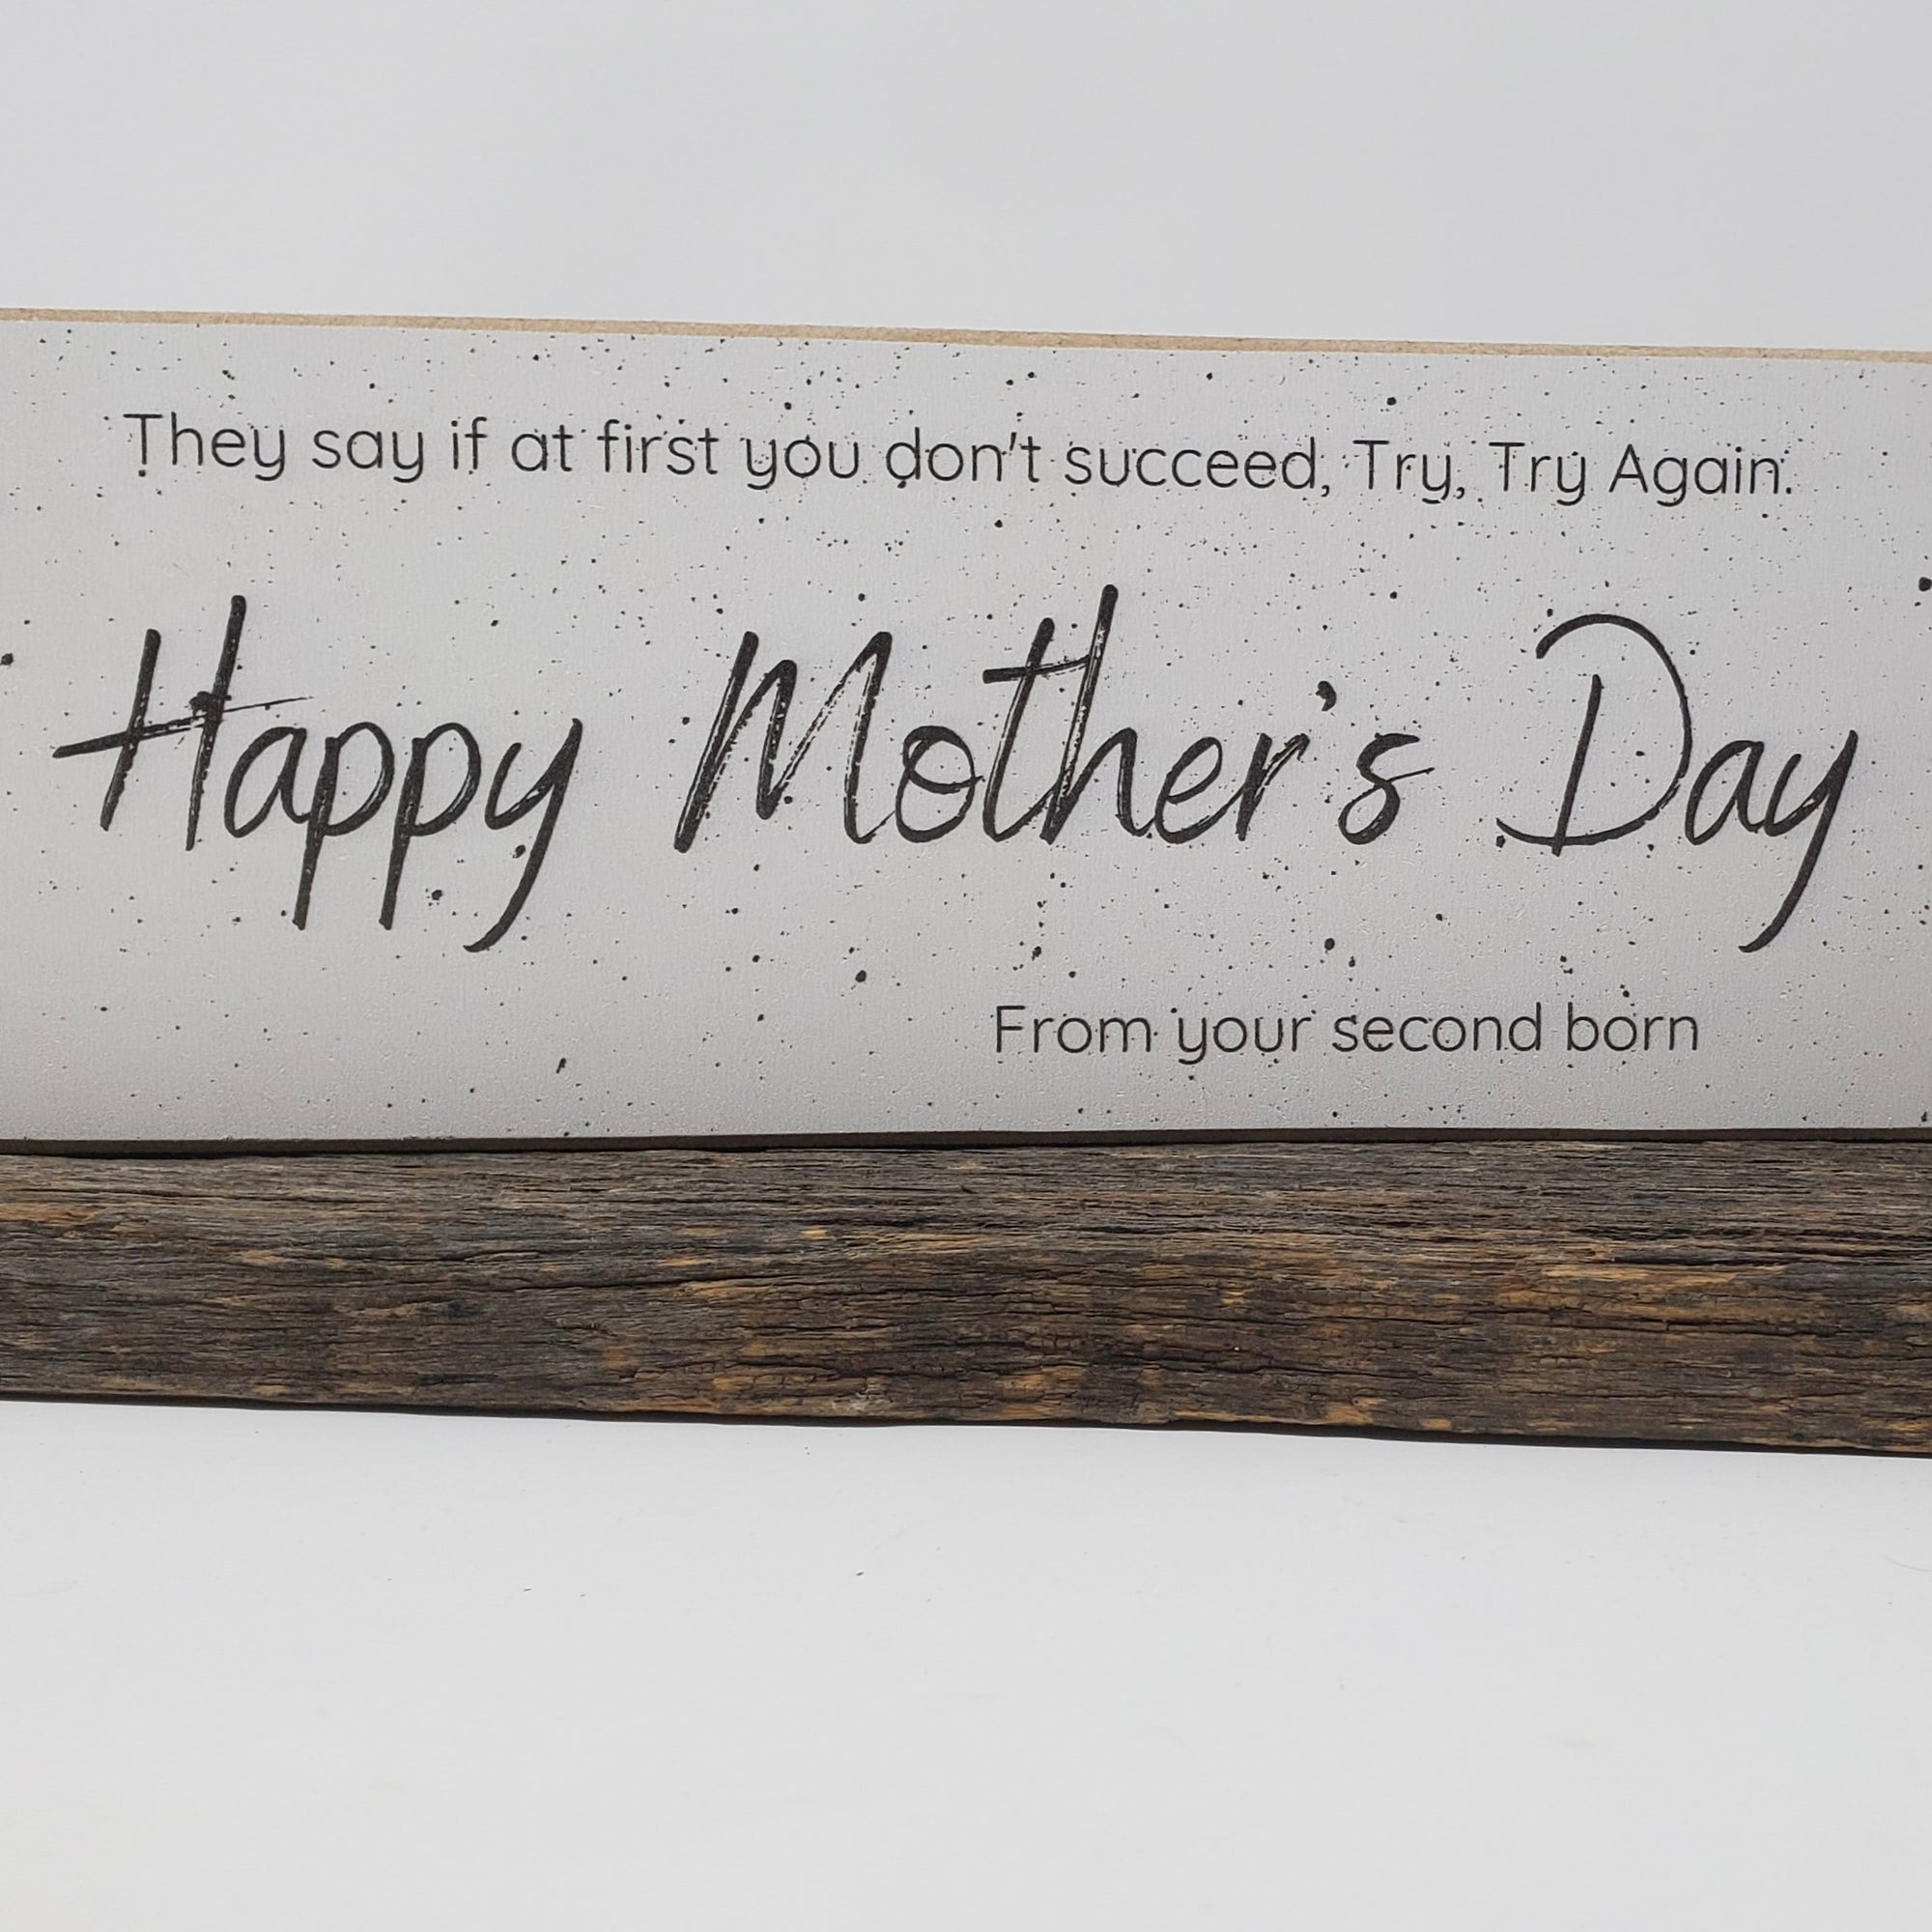 Happy Mother's Day from Second Born Funny Sign